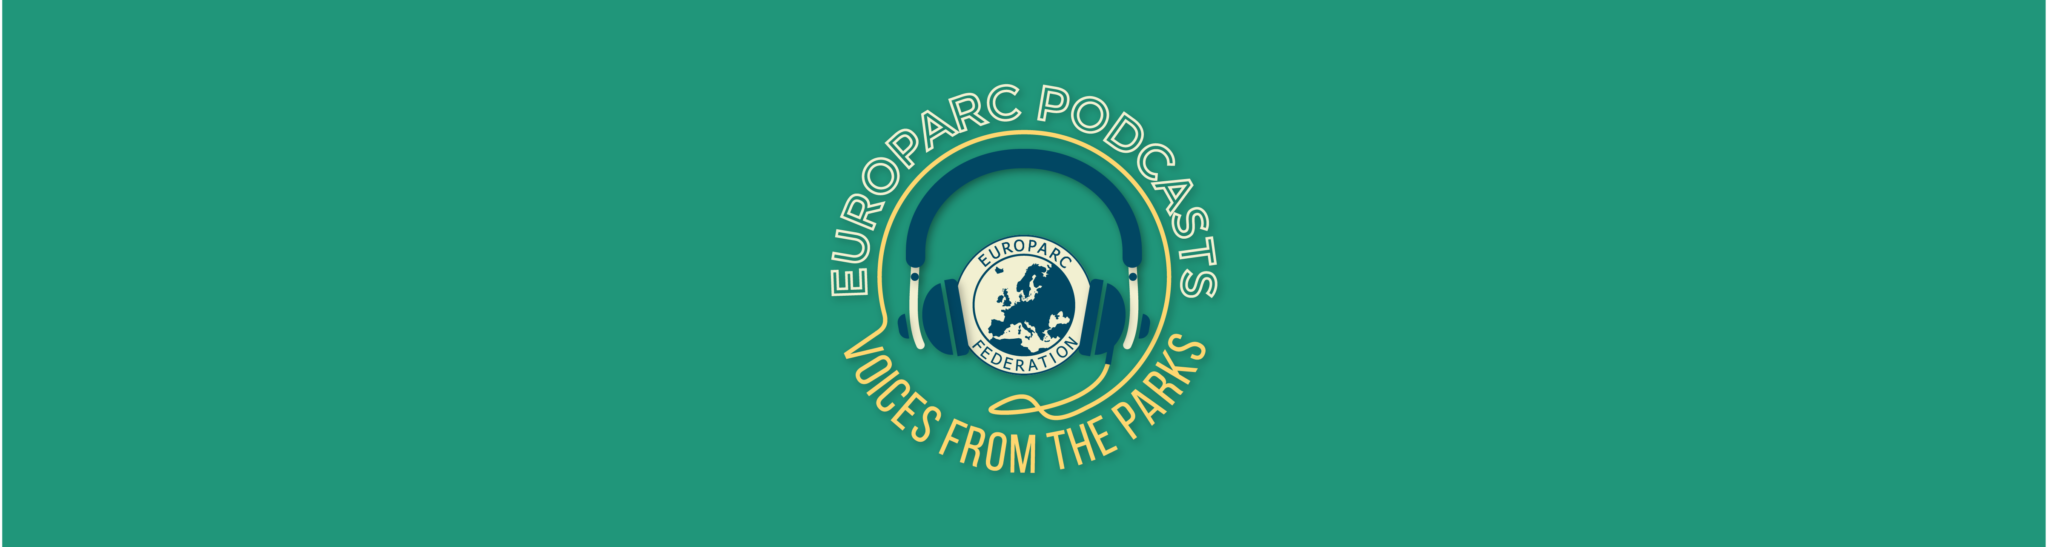 EUROPARC Podcasts - EUROPARC Federation